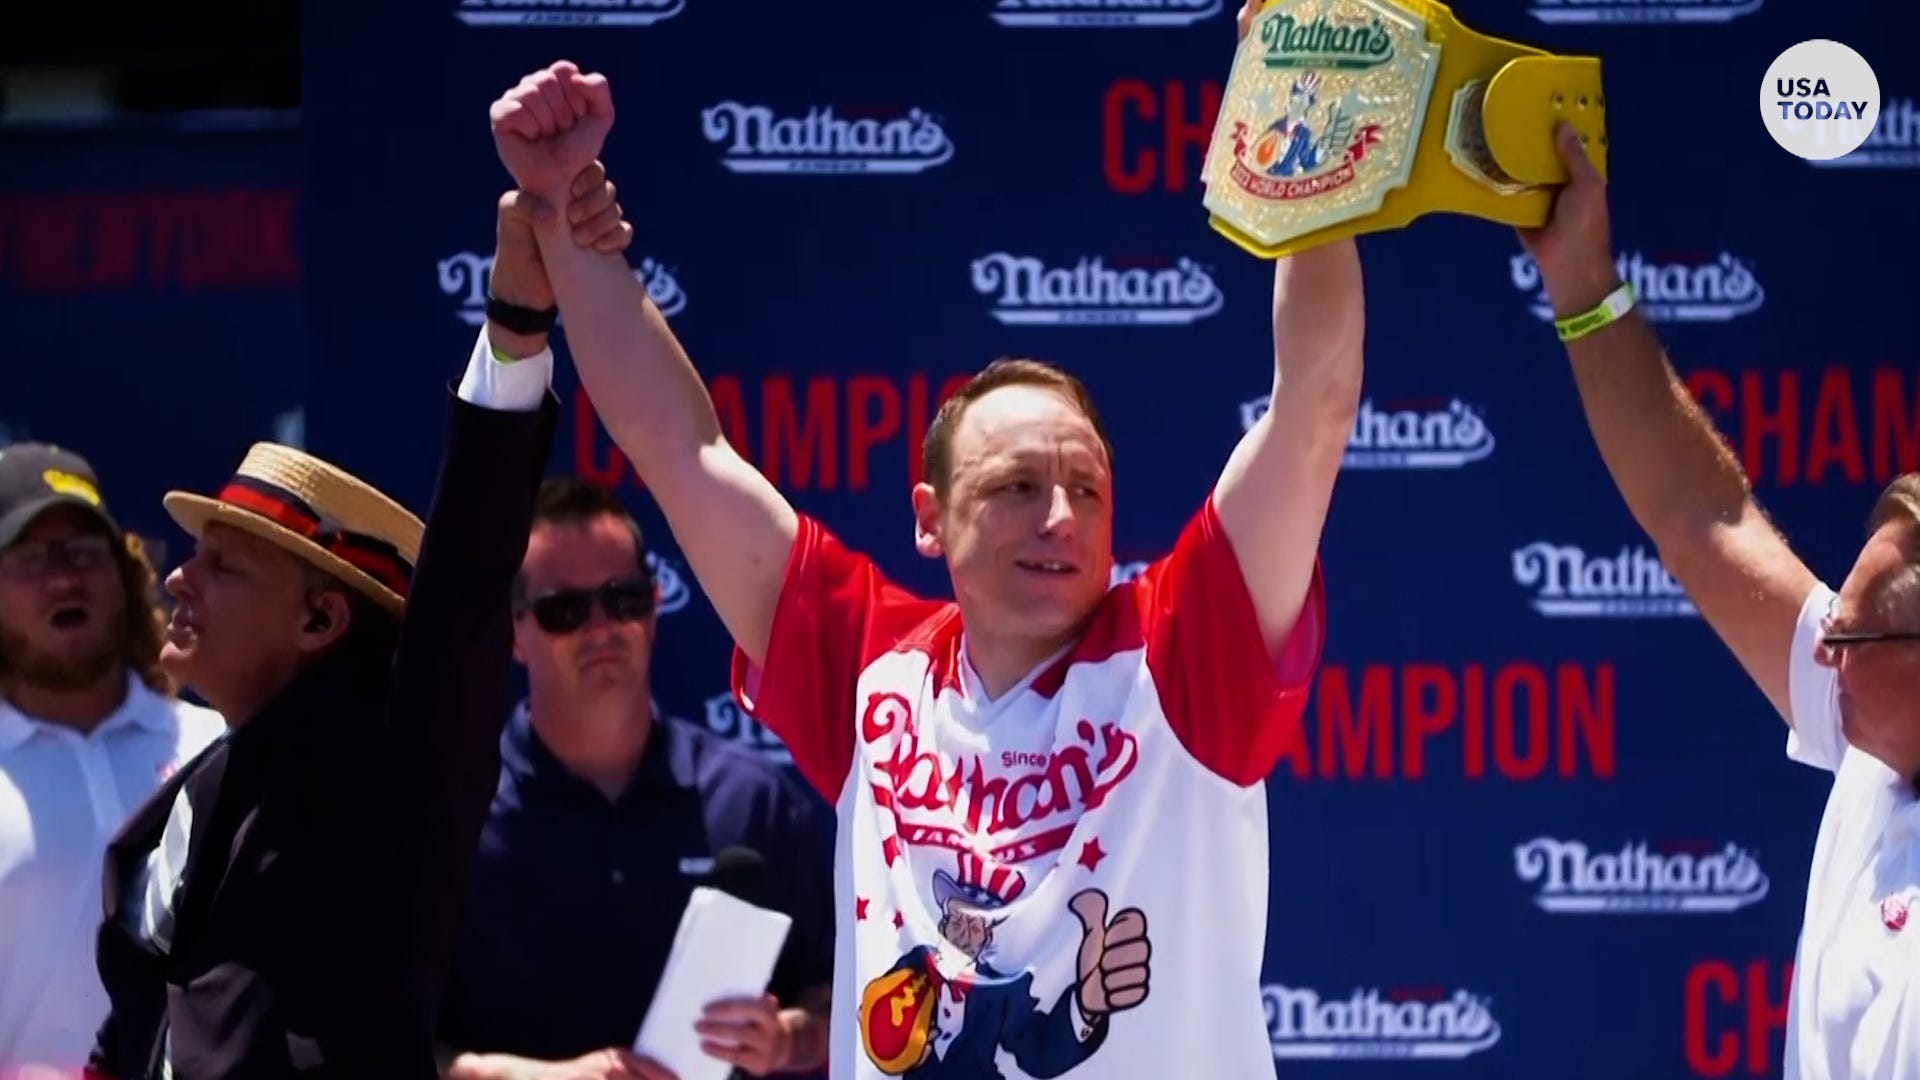 joey-chestnut-miki-sudo-aim-to-sweep-field-again-in-nathan-s-hot-dog-eating-contest